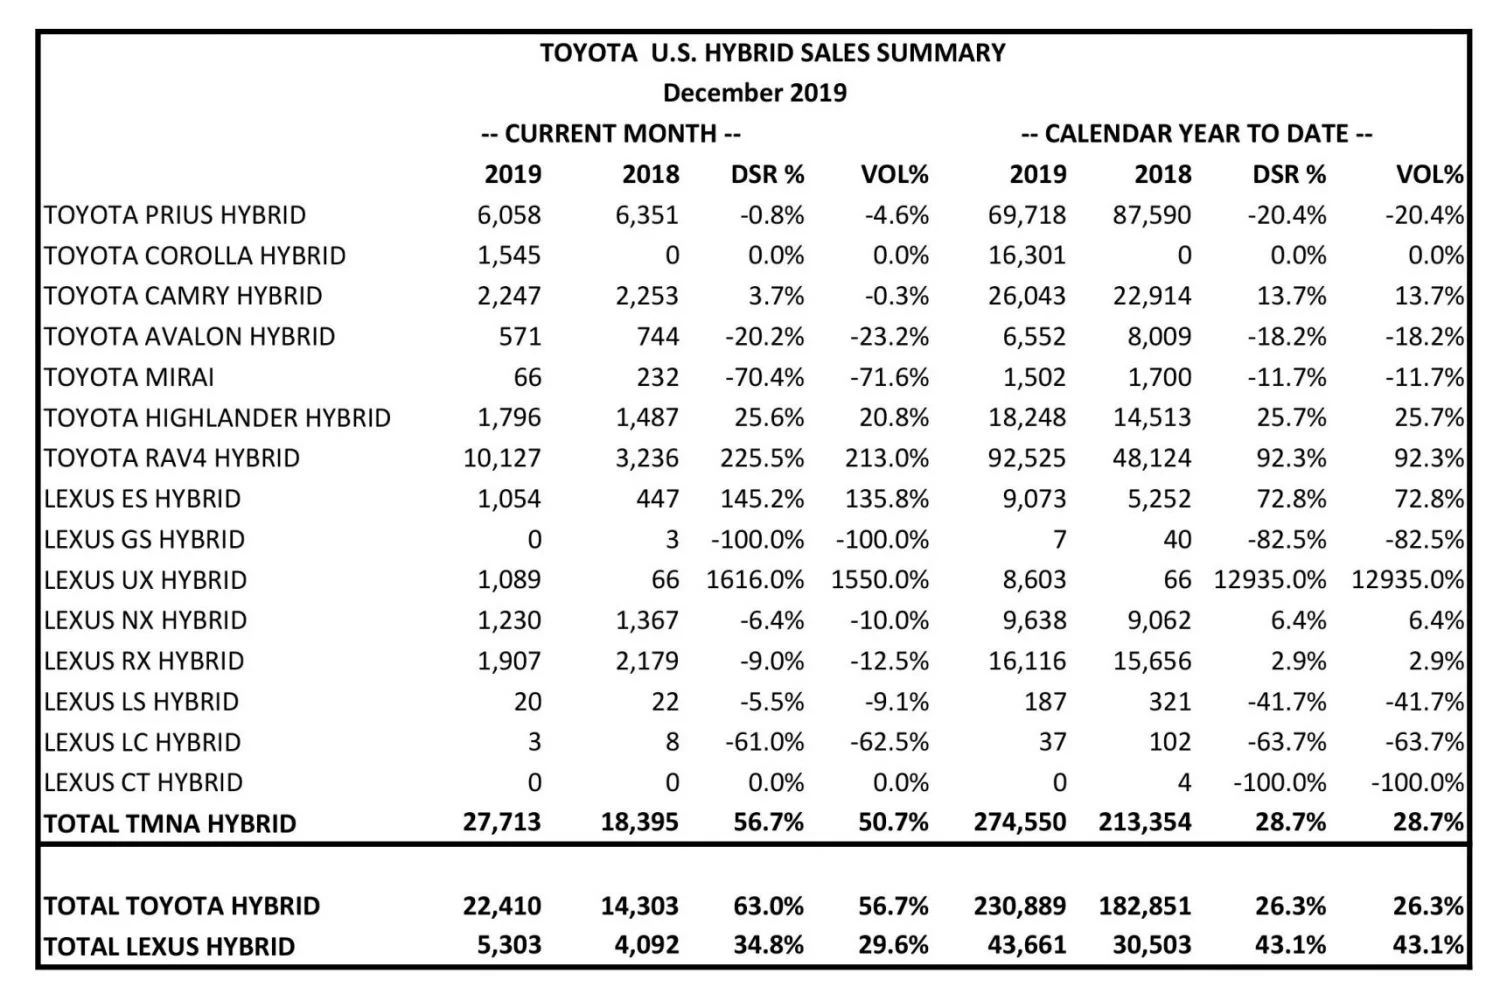 Toyota and Lexus US hybrid sales in 2019